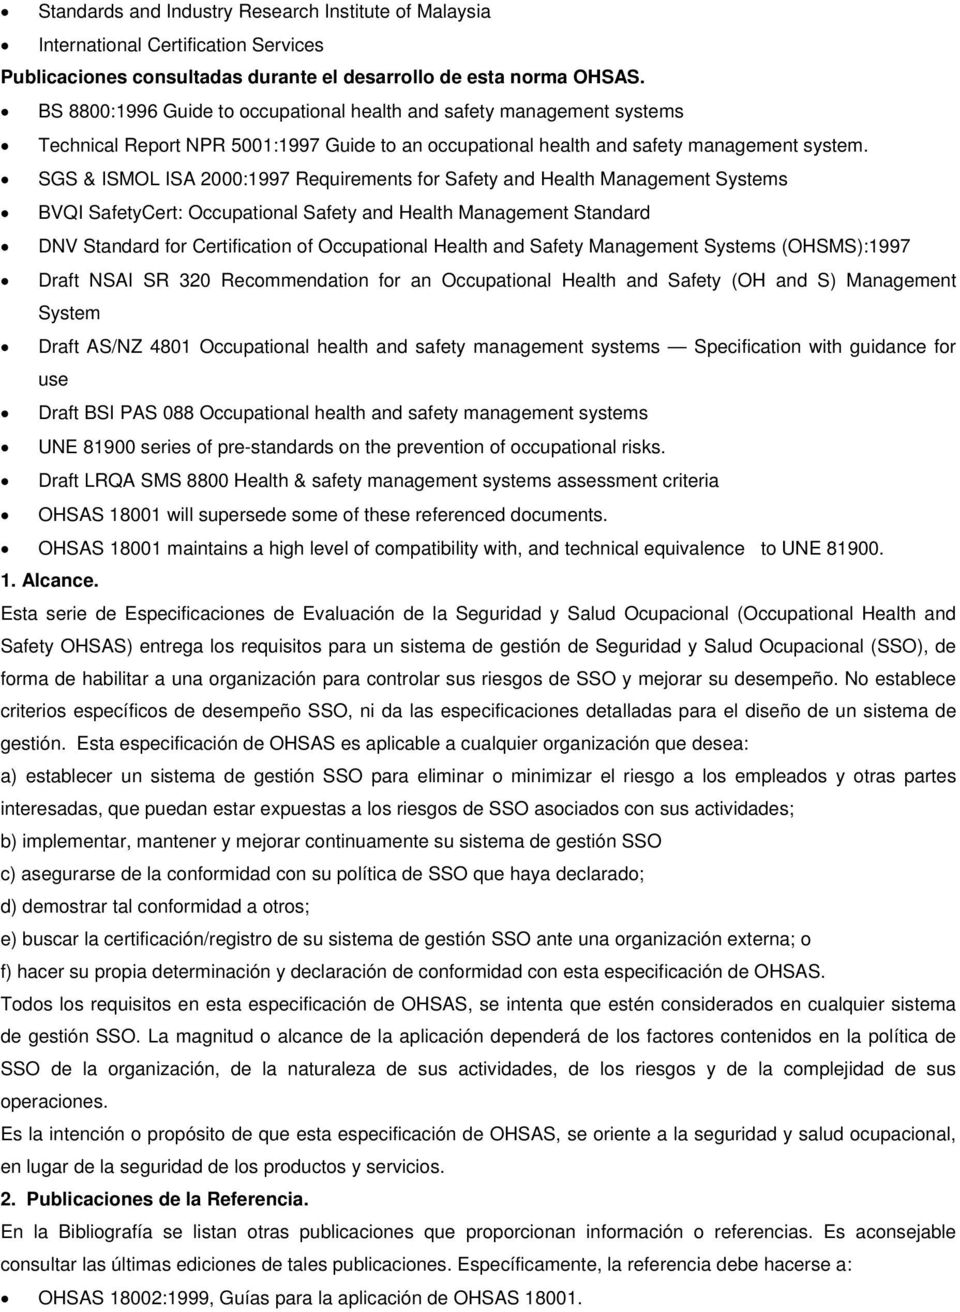 SGS & ISMOL ISA 2:1997 Requirements for Safety and Health Management Systems BVQI SafetyCert: Occupational Safety and Health Management Standard DNV Standard for Certification of Occupational Health